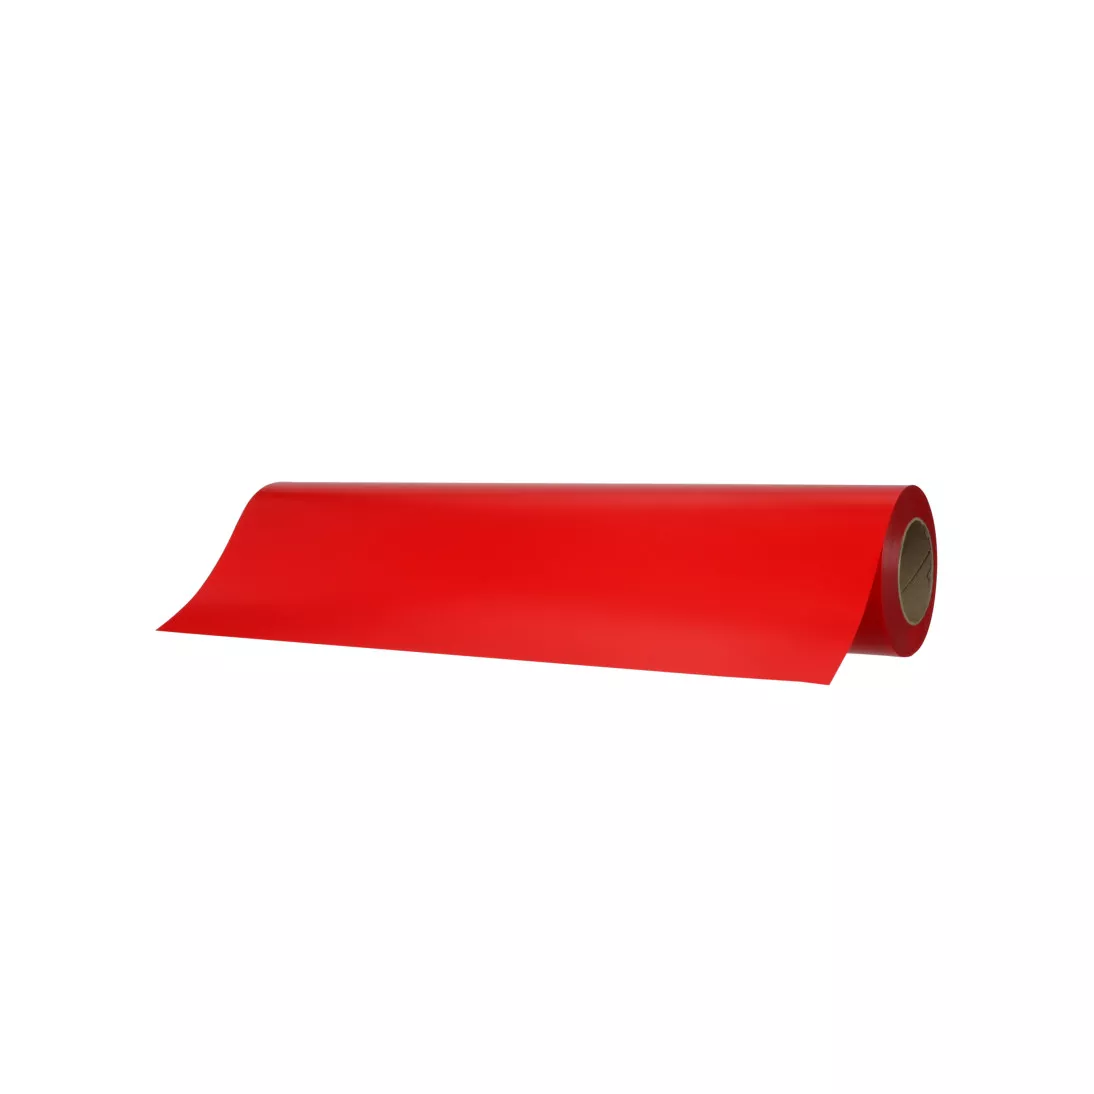 3M™ Scotchcal™ Translucent Graphic Film 3630-93, Fire Engine Red, 48 in
x 50 yd